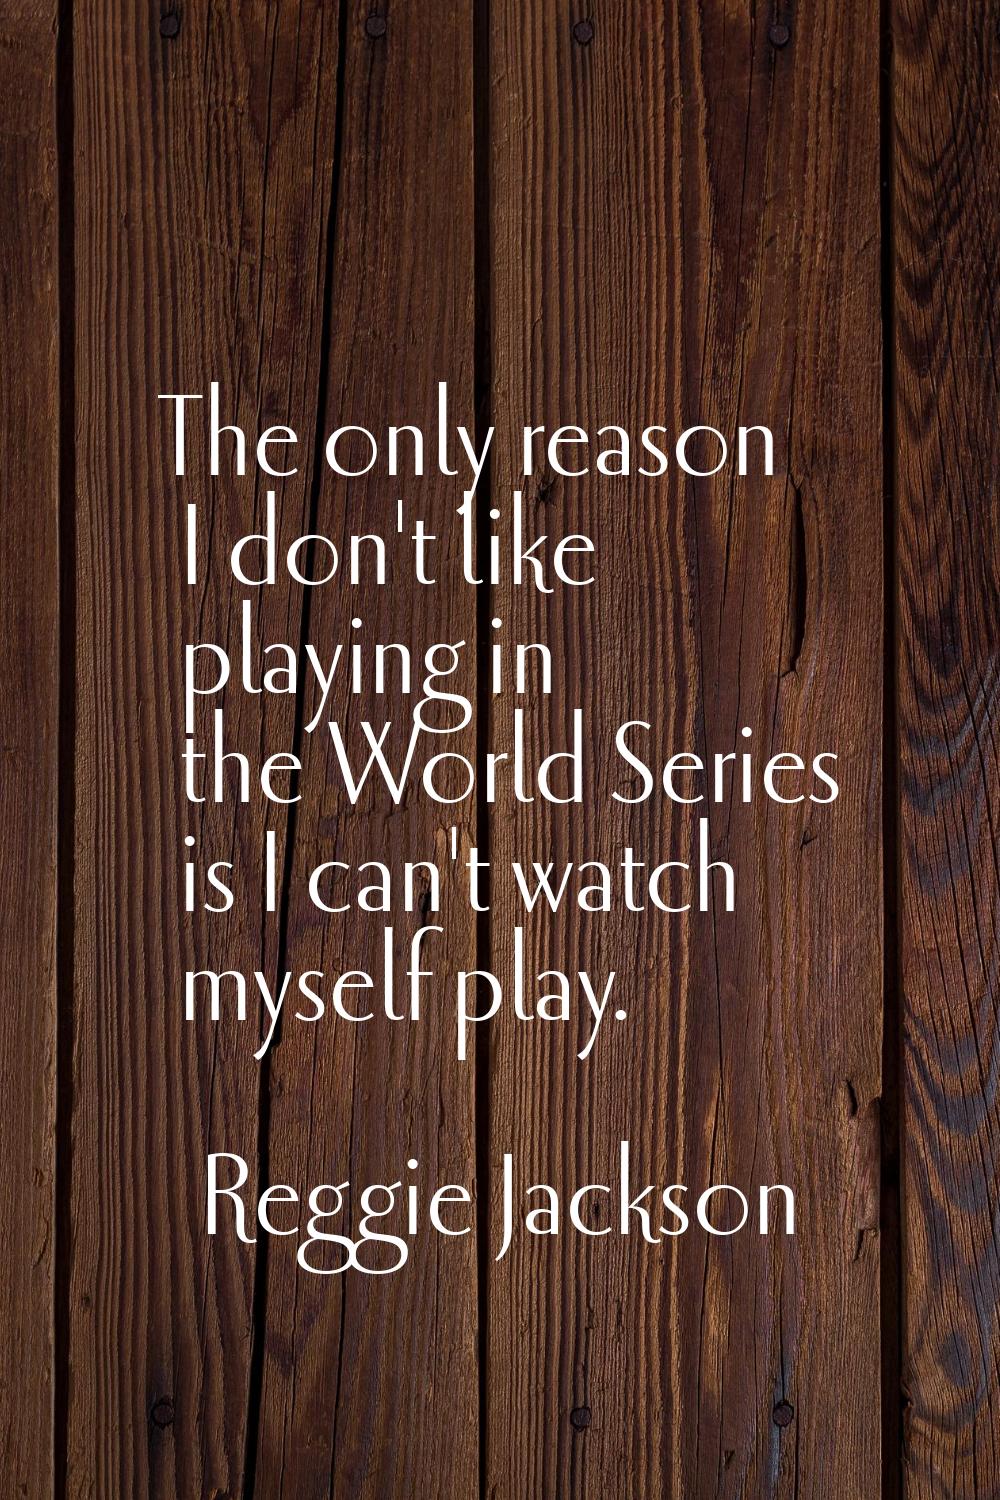 The only reason I don't like playing in the World Series is I can't watch myself play.